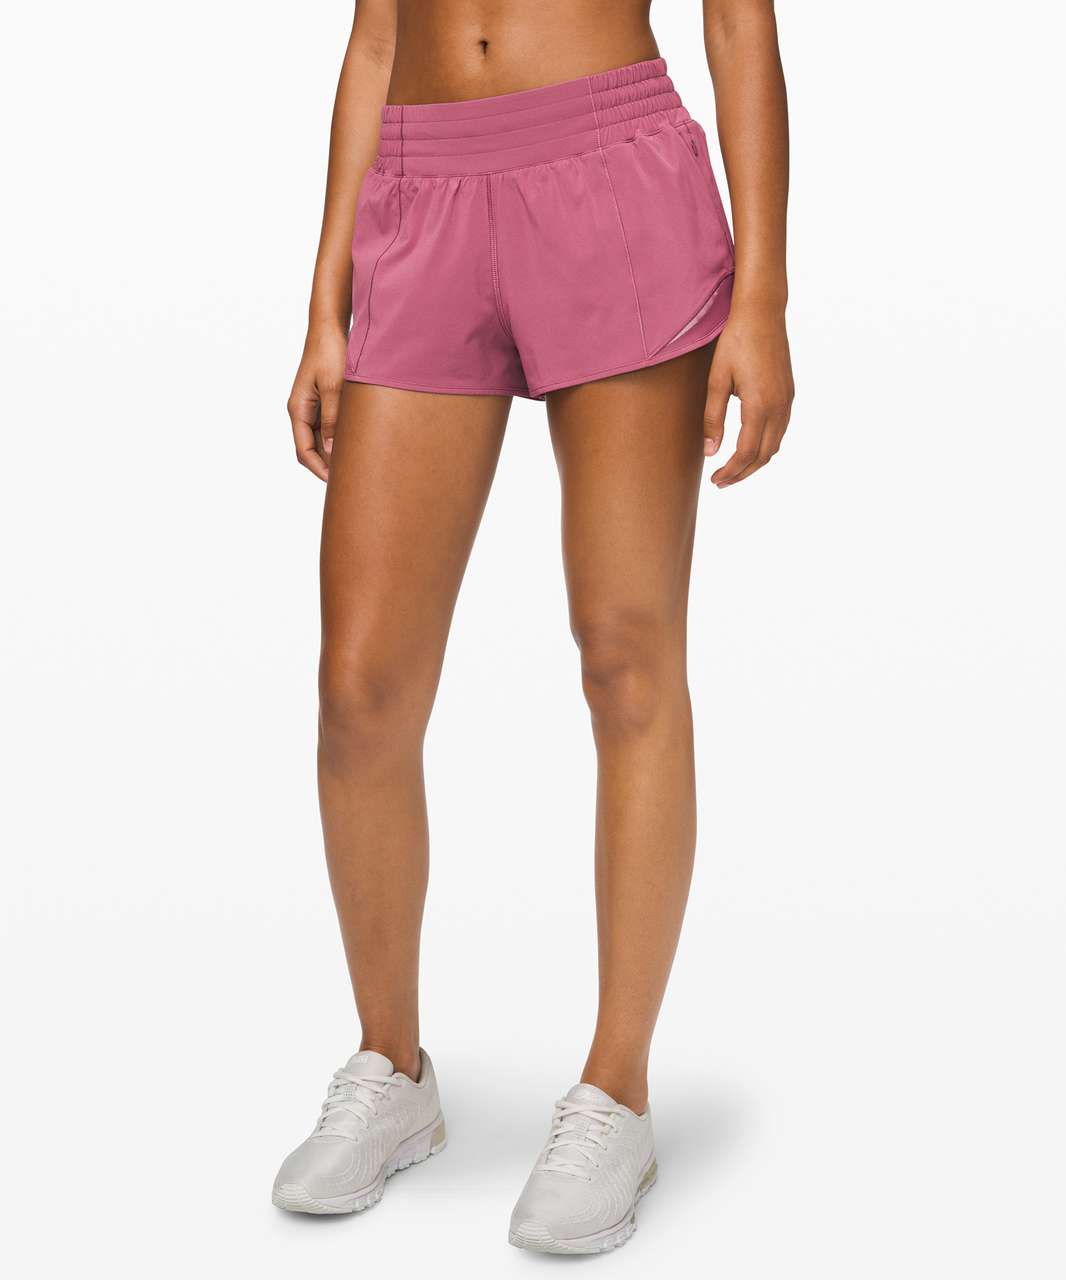 lululemon athletica Hotty Hot High-rise Lined Shorts 2.5 in Pink